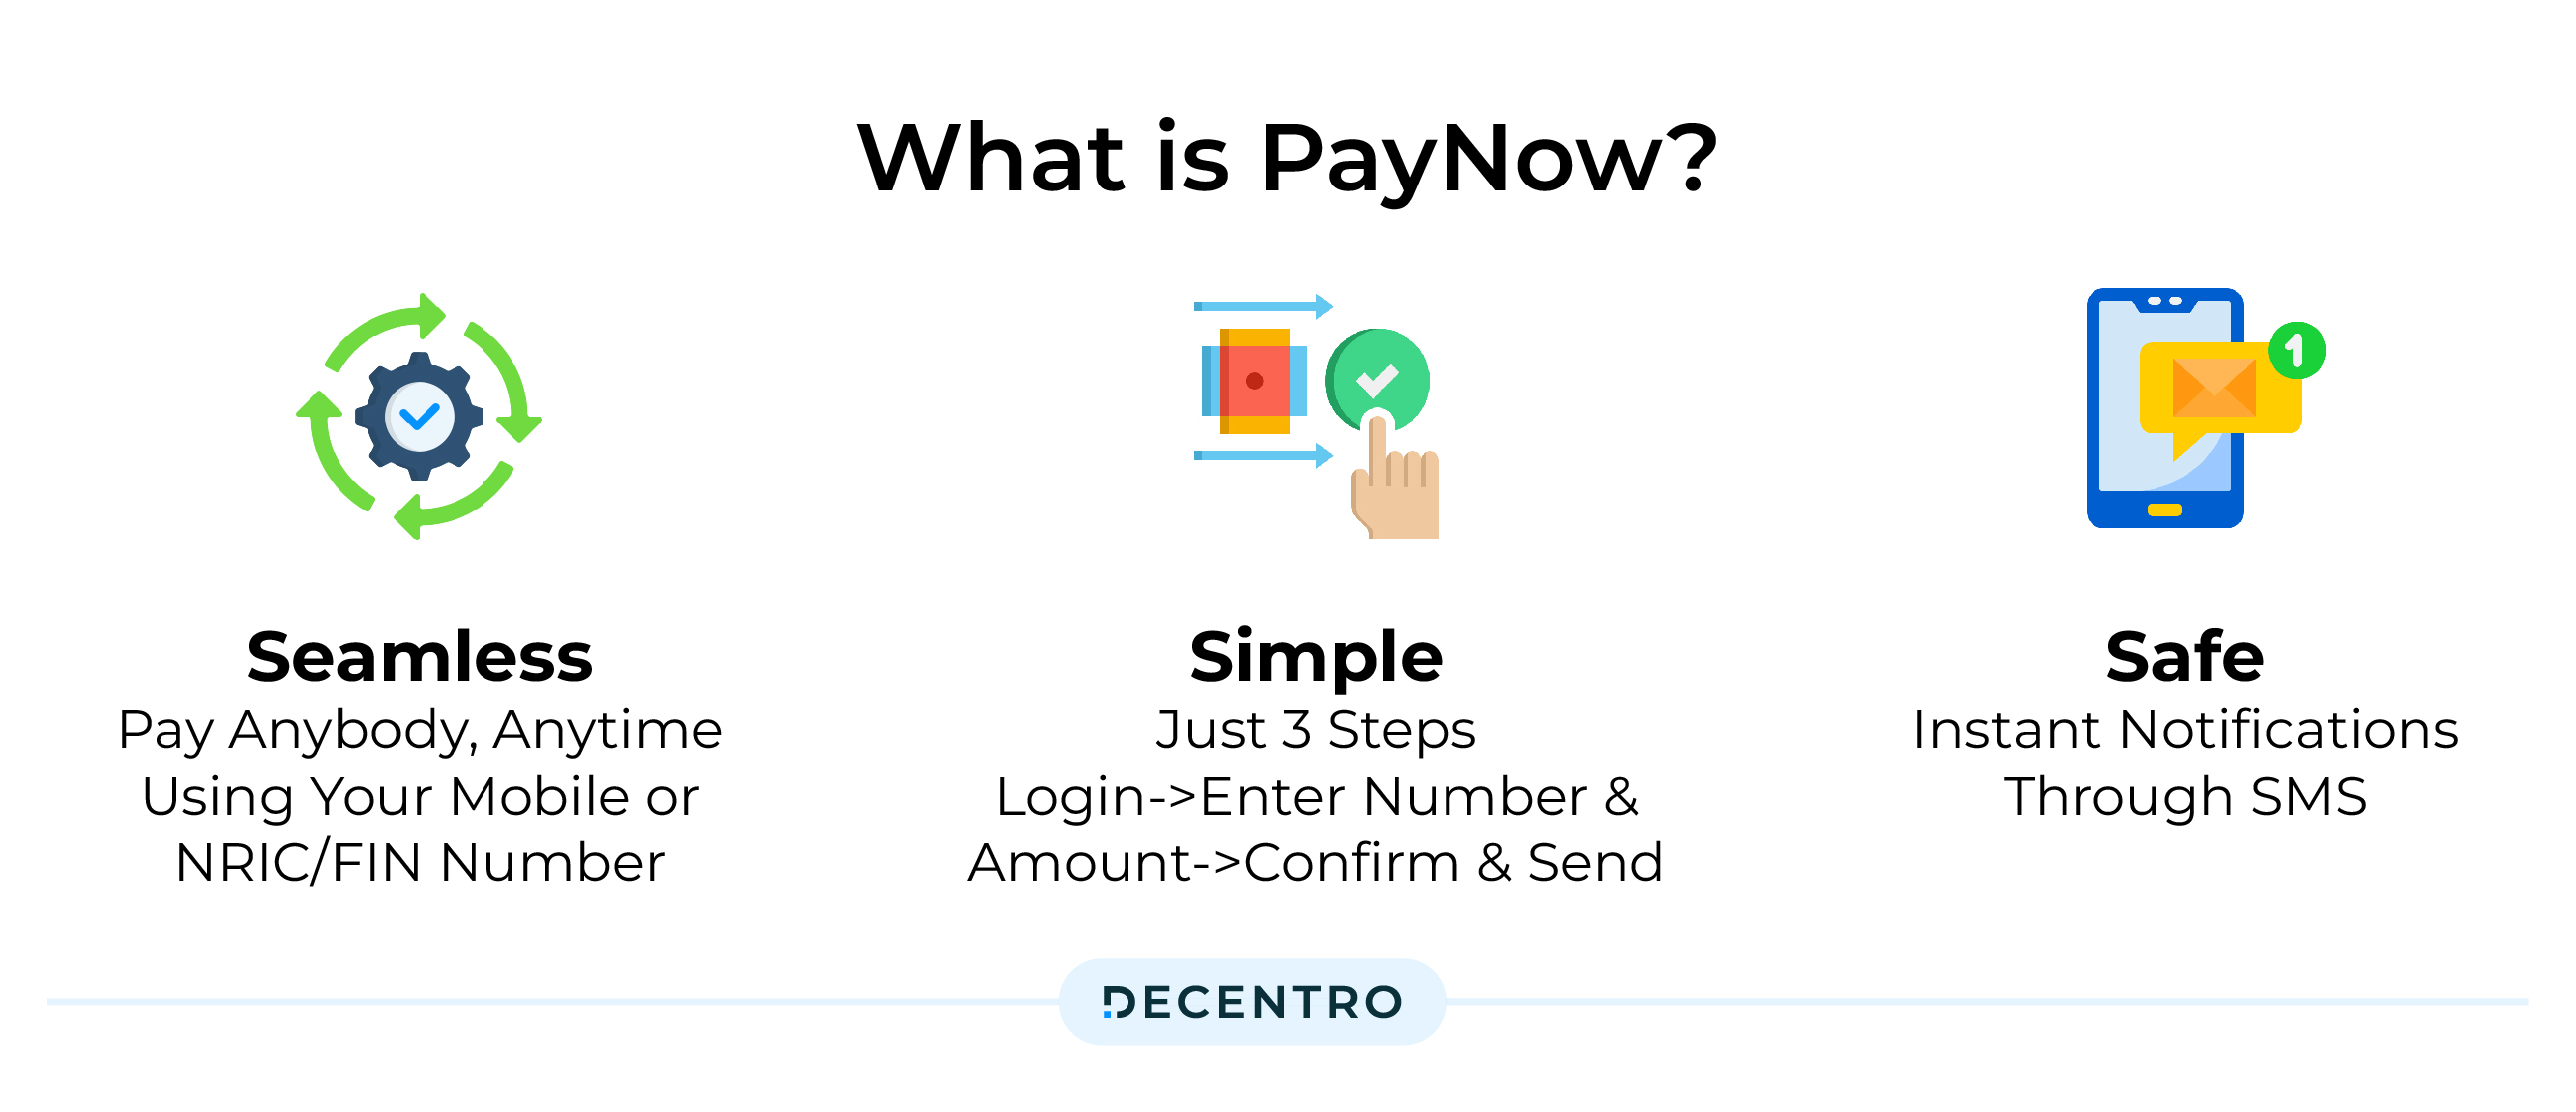 What is PayNow?